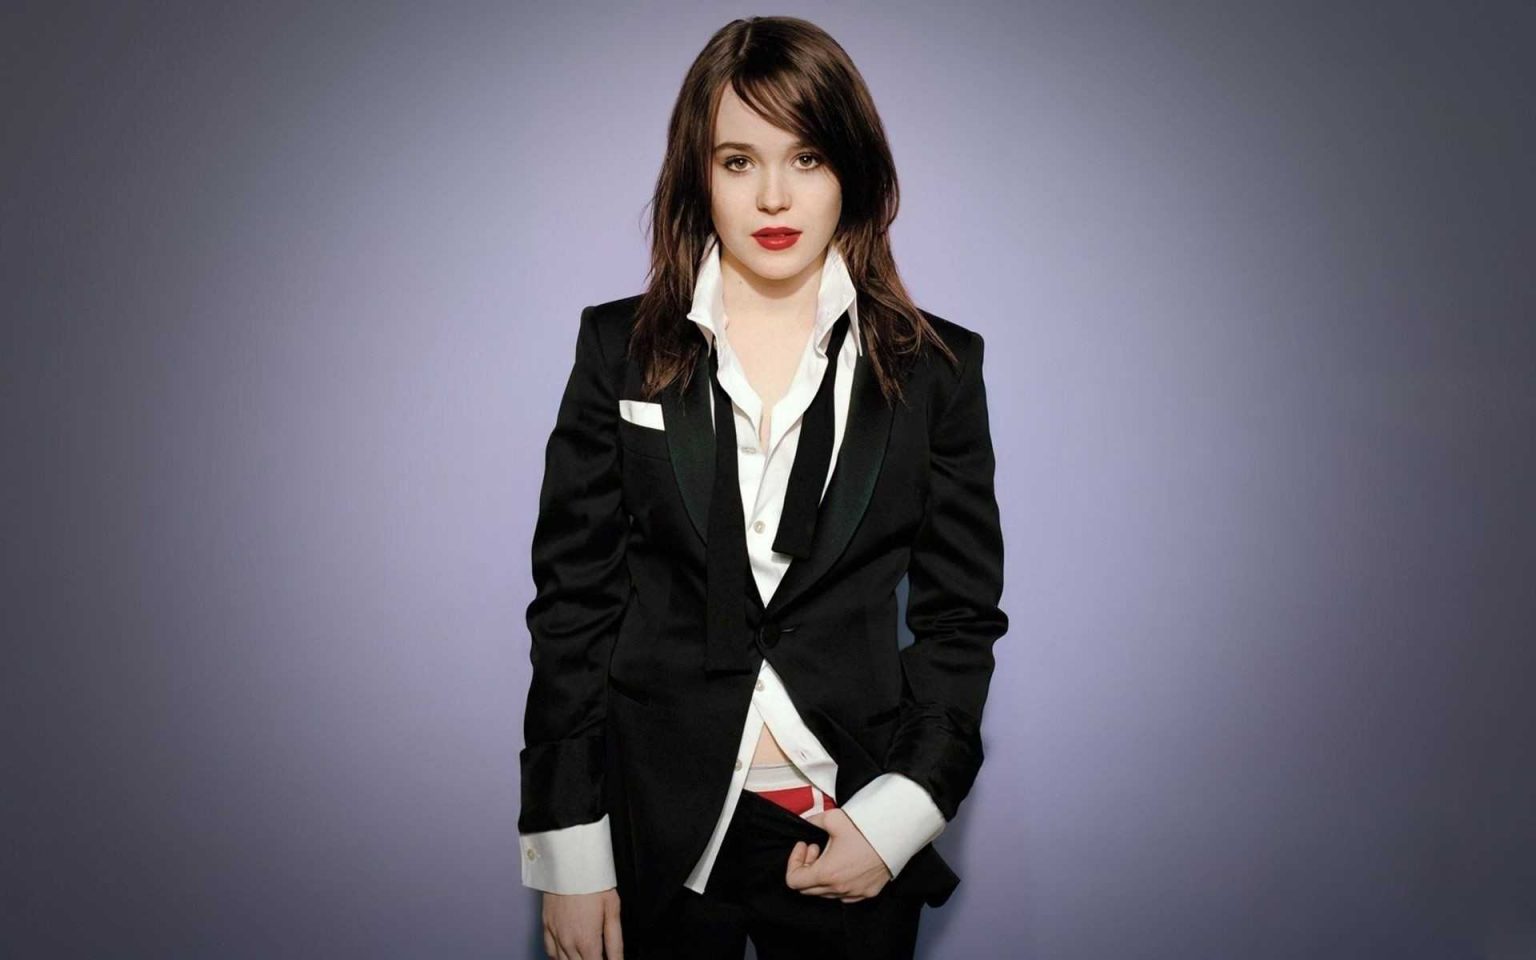 41 Ellen Page Nude Pictures Which Are Impressively Intriguing 212